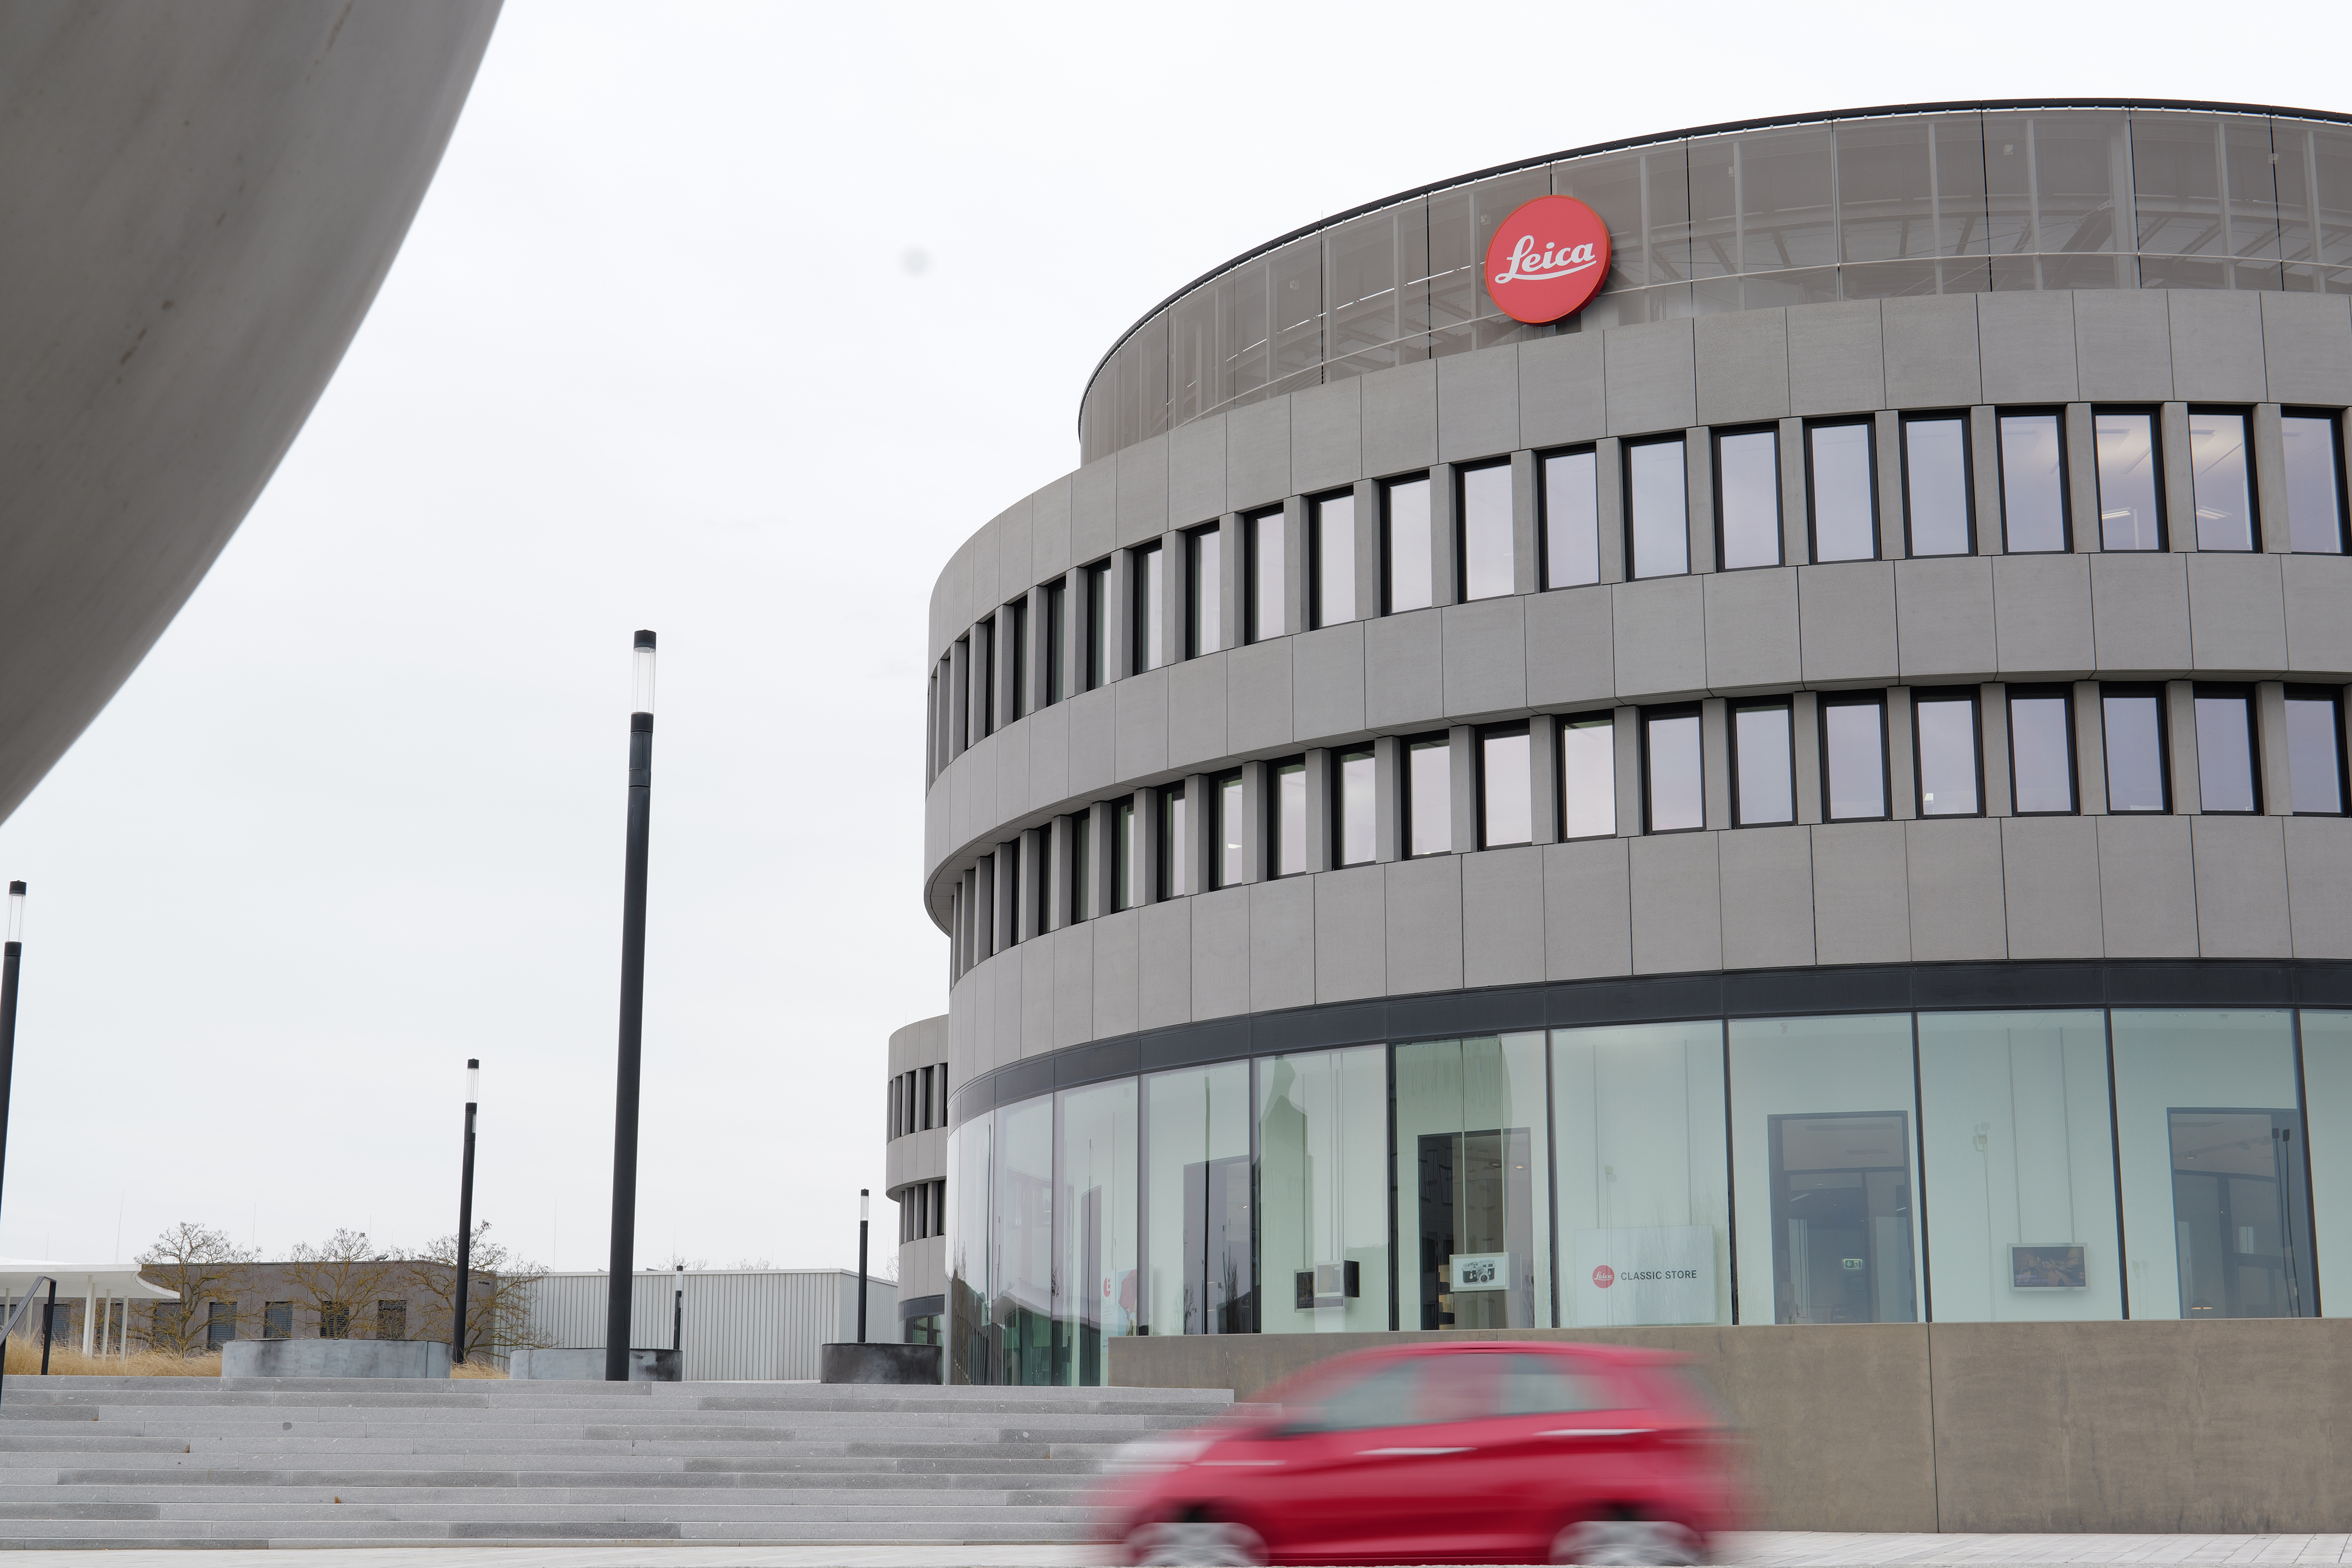 A sample photo of the Leica HQ building taken on the Leica SL3 camera